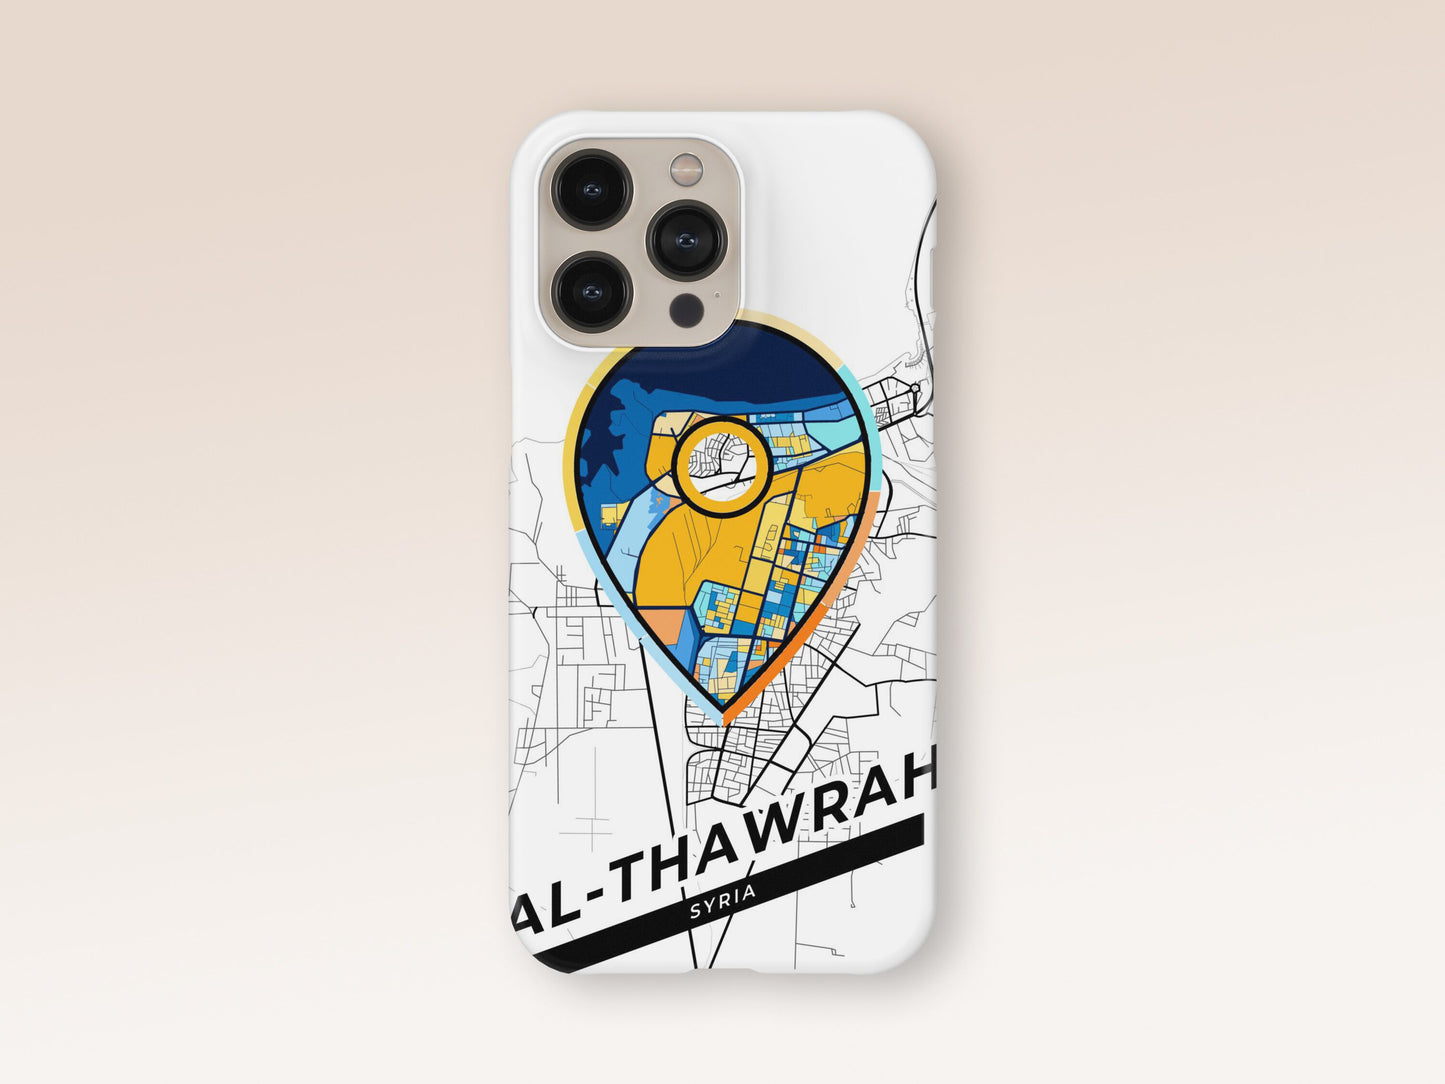 Al-Thawrah Syria slim phone case with colorful icon. Birthday, wedding or housewarming gift. Couple match cases. 1